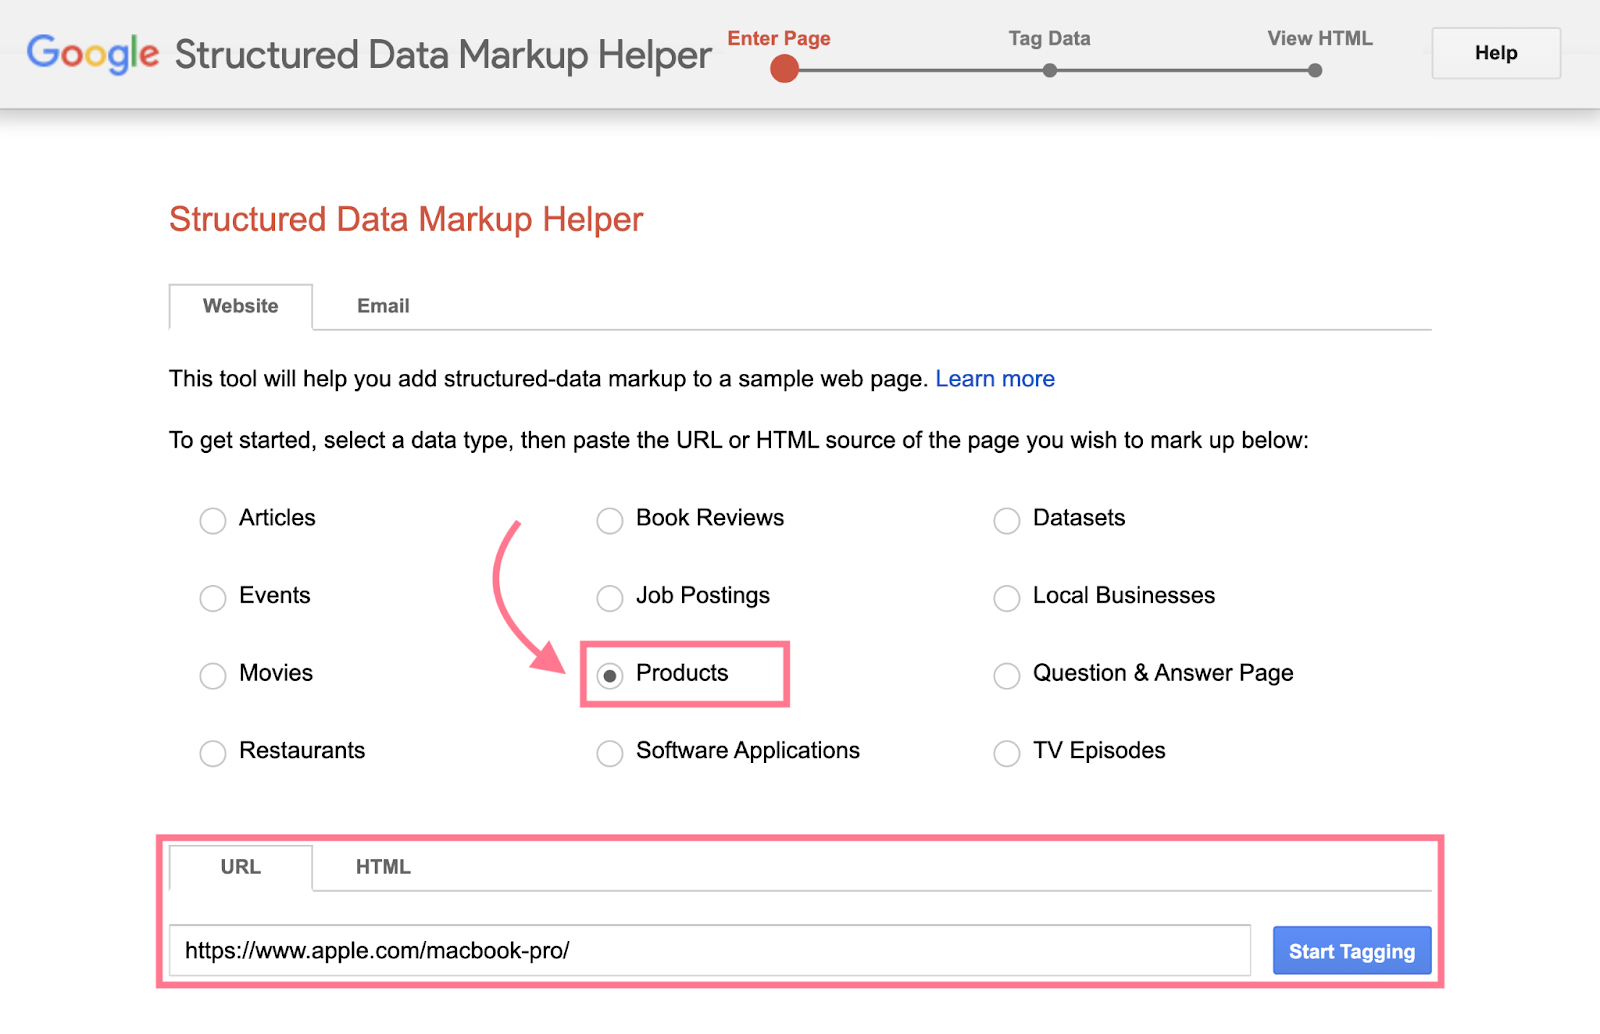 creating a product structured data markup in Google’s Structured Data Markup Helper